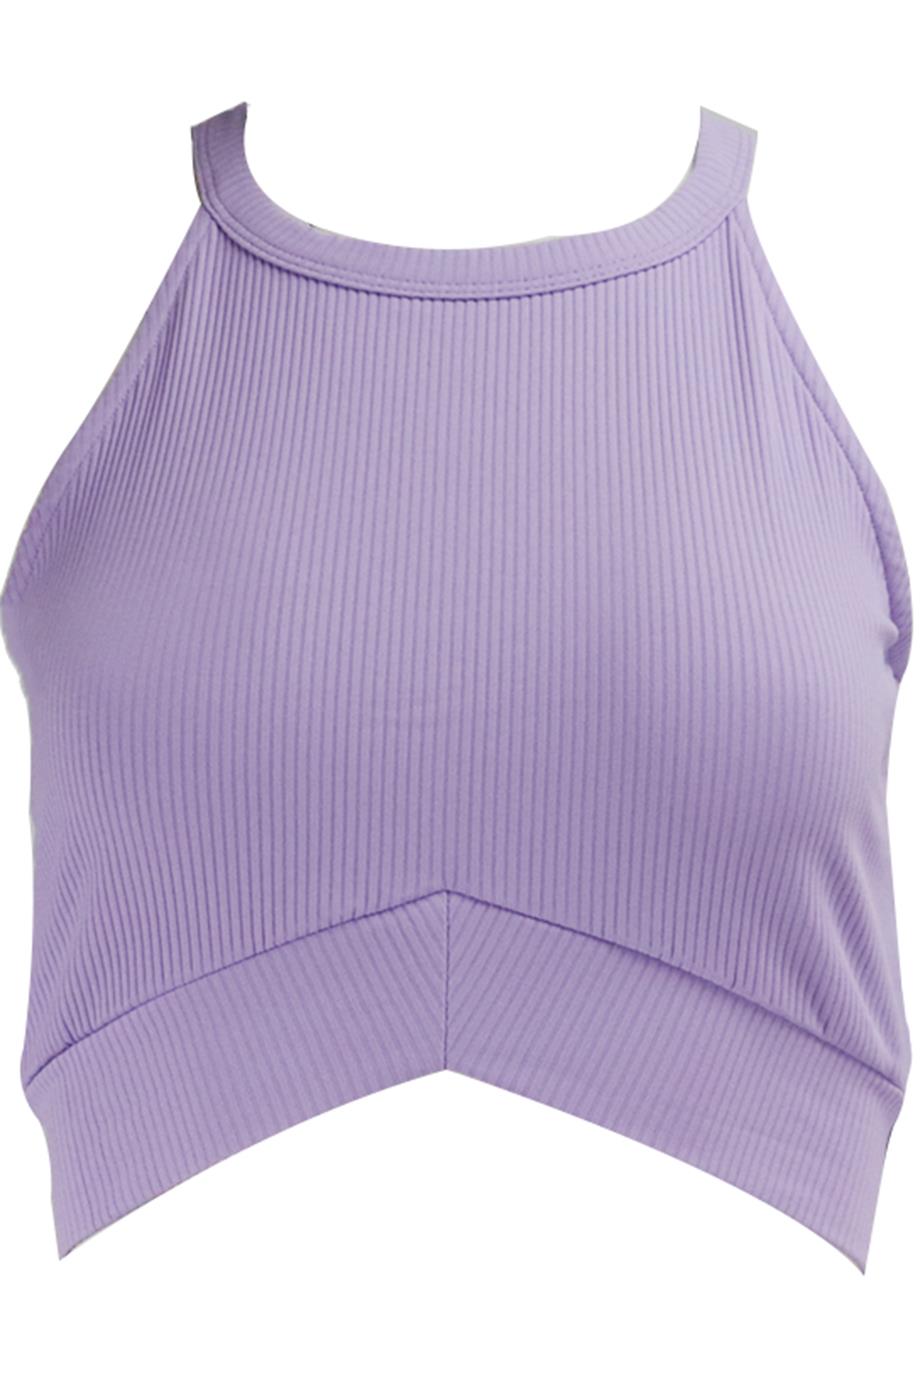 YEAR OF OURS RIBBED STRETCH JERSEY SPORTS BRA MEDIUM